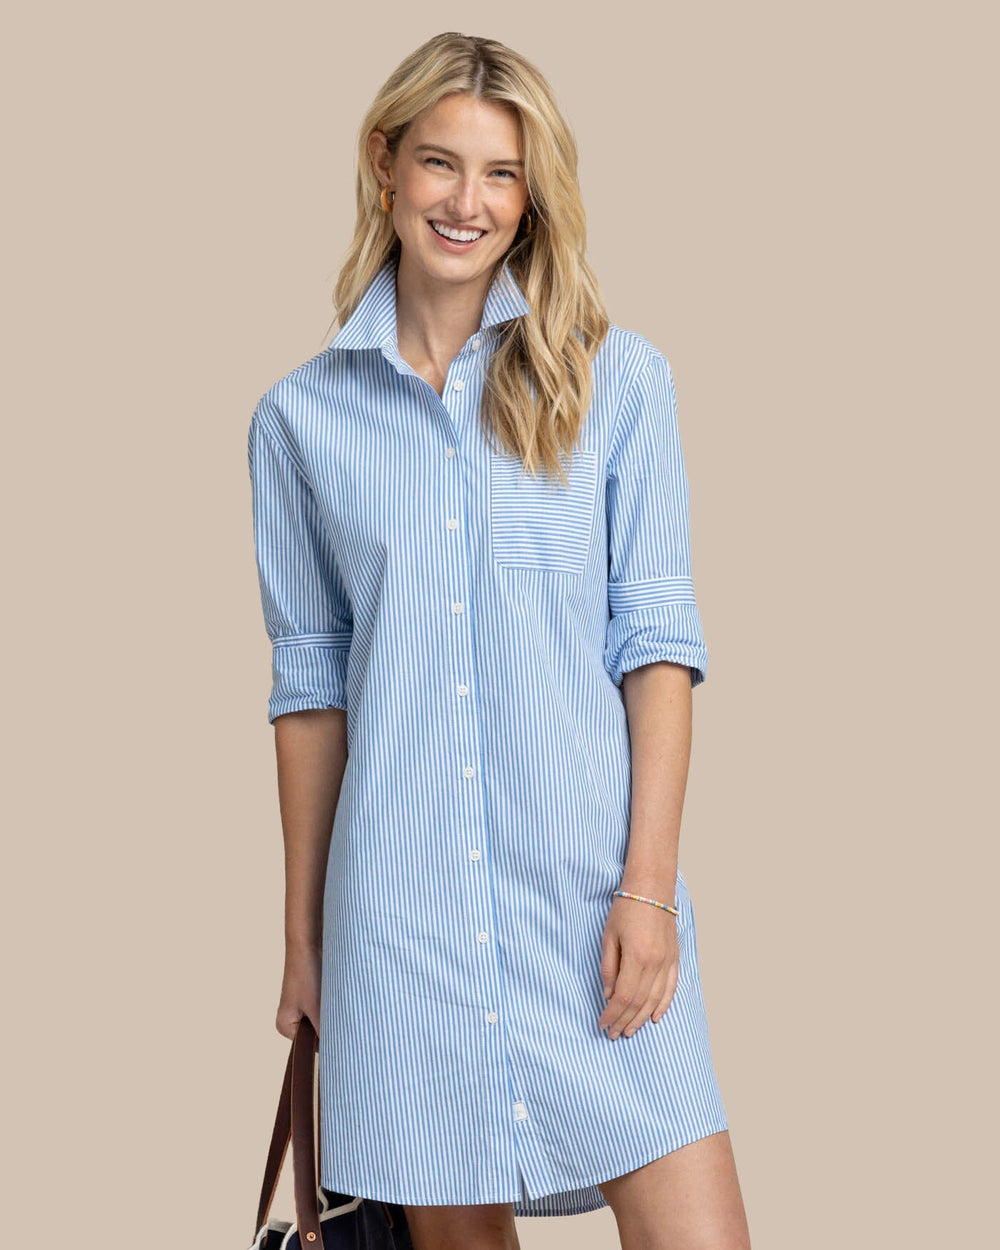 The front view of the Southern Tide Cam Stripe Poplin Dress by Southern Tide - Blue Fin